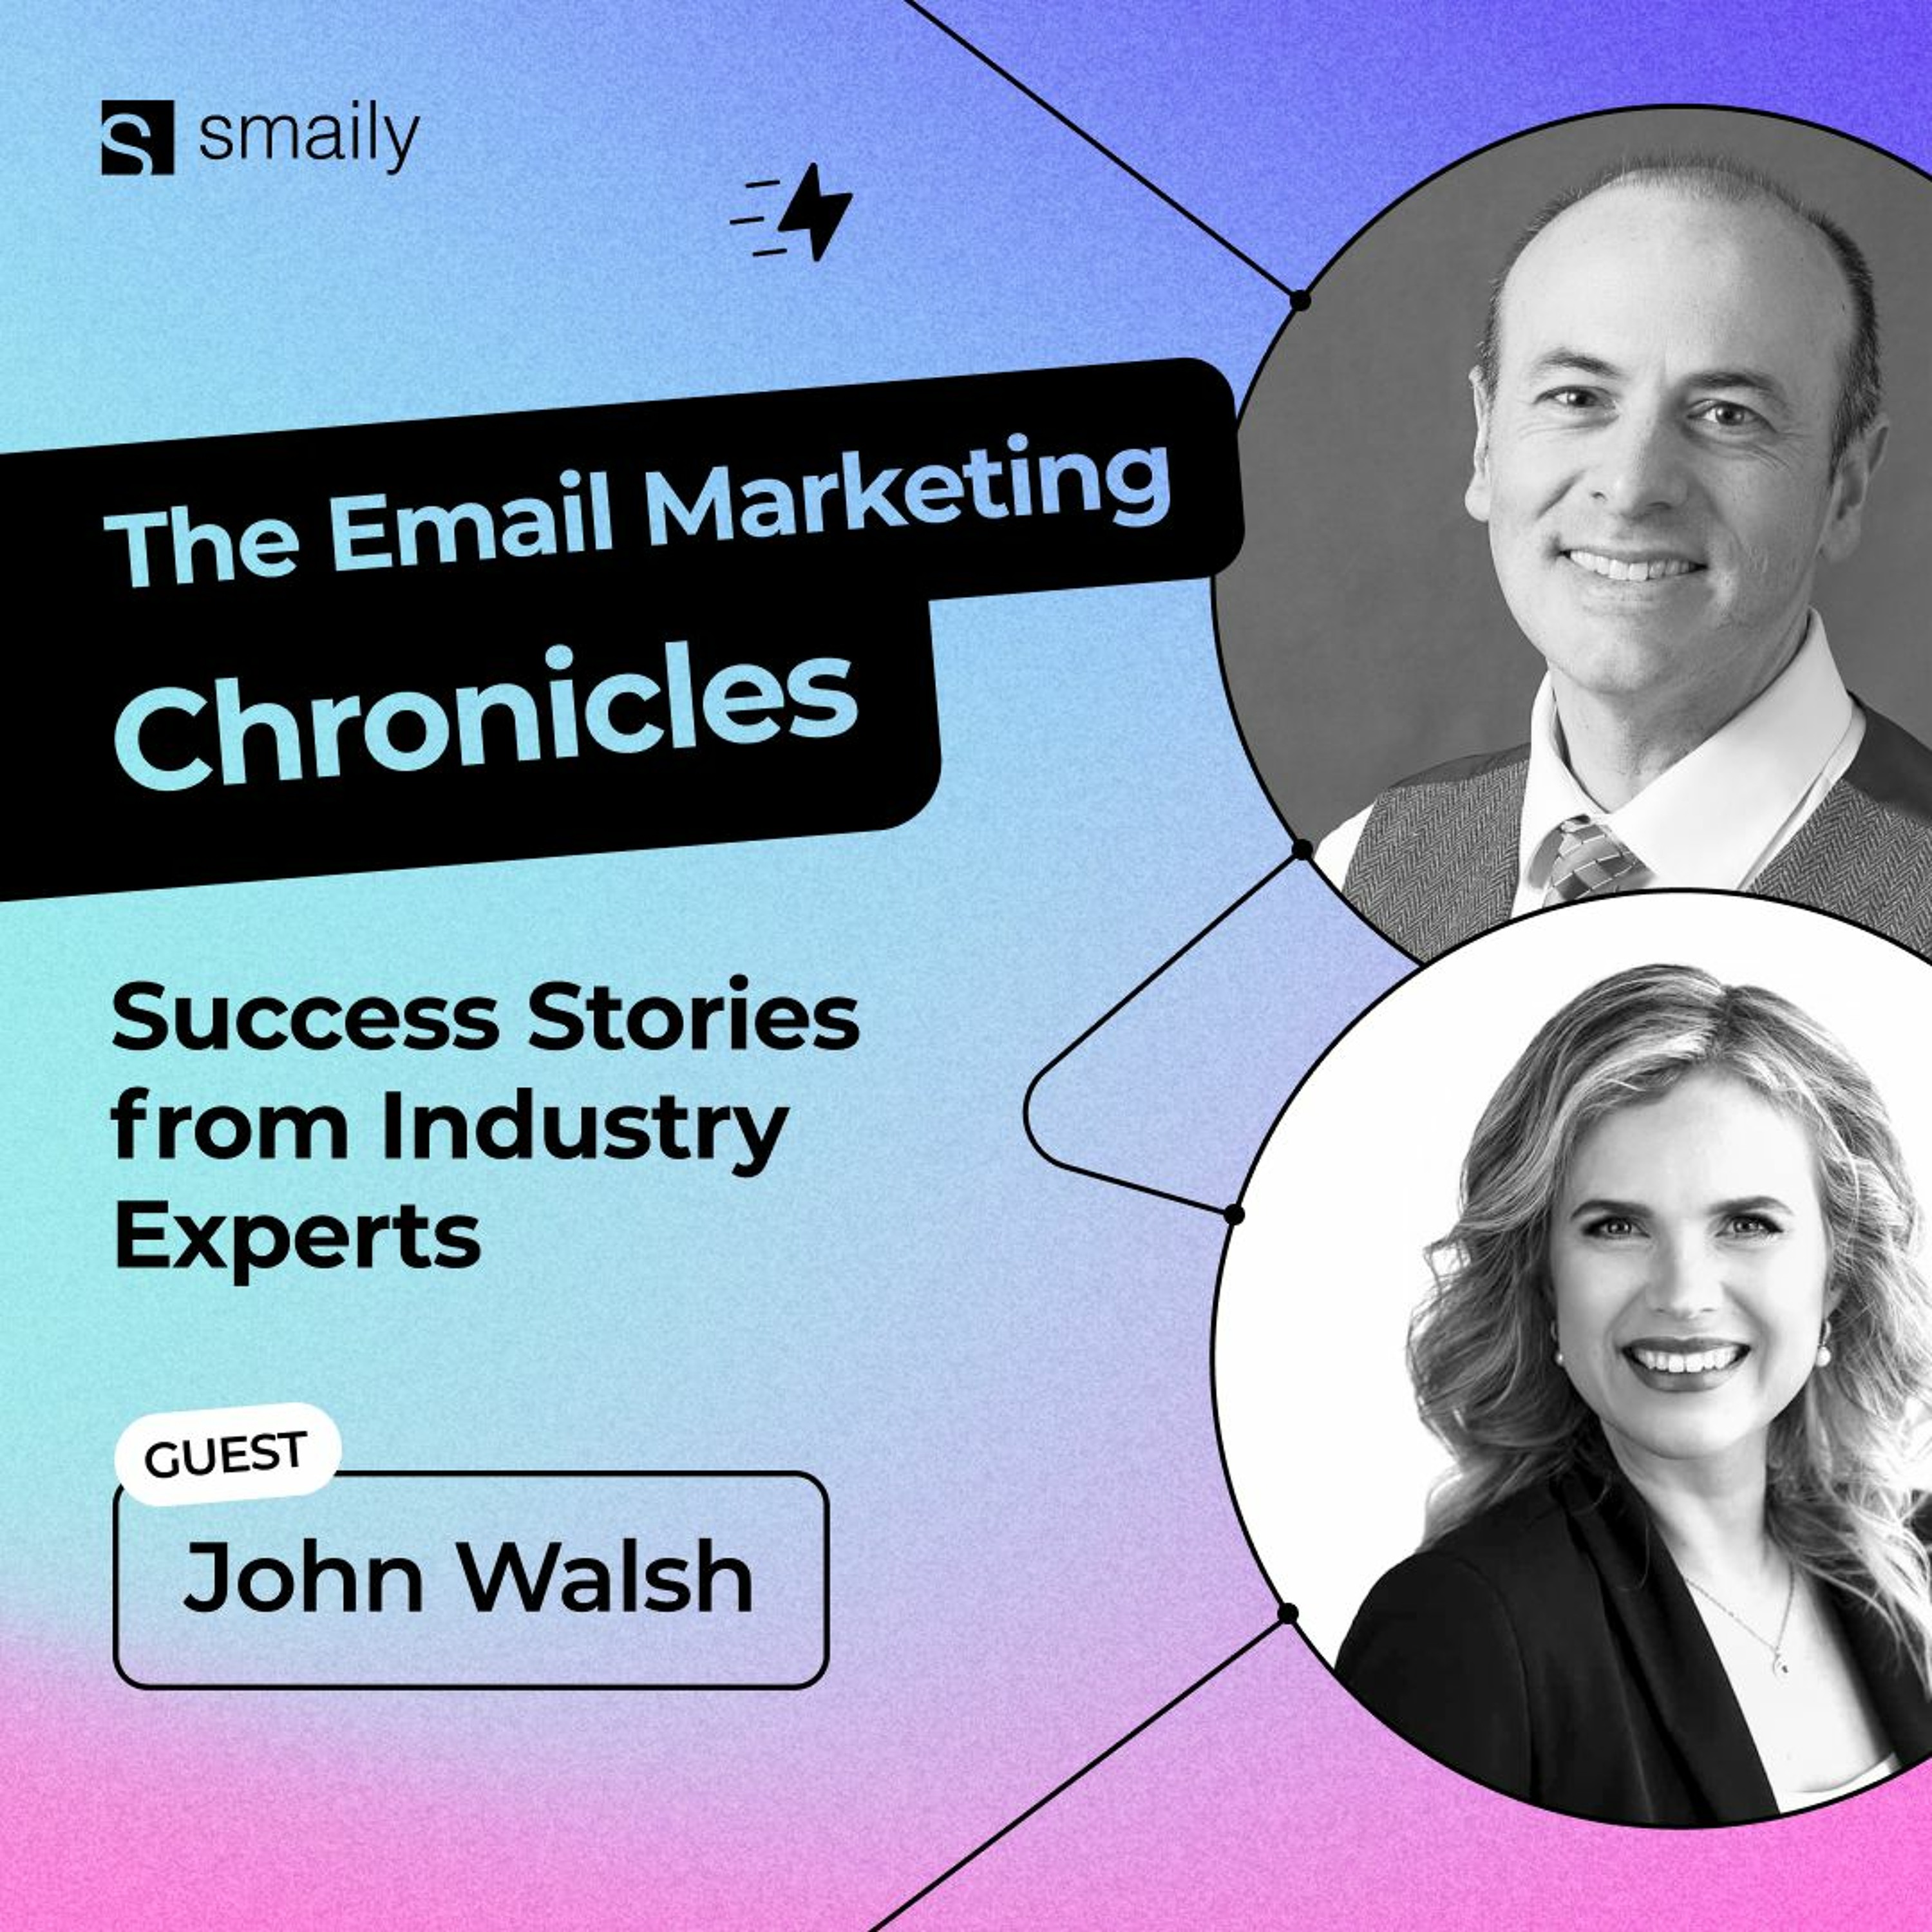 The Email Marketing Chronicles: Email marketing for Nonprofits with John Walsh